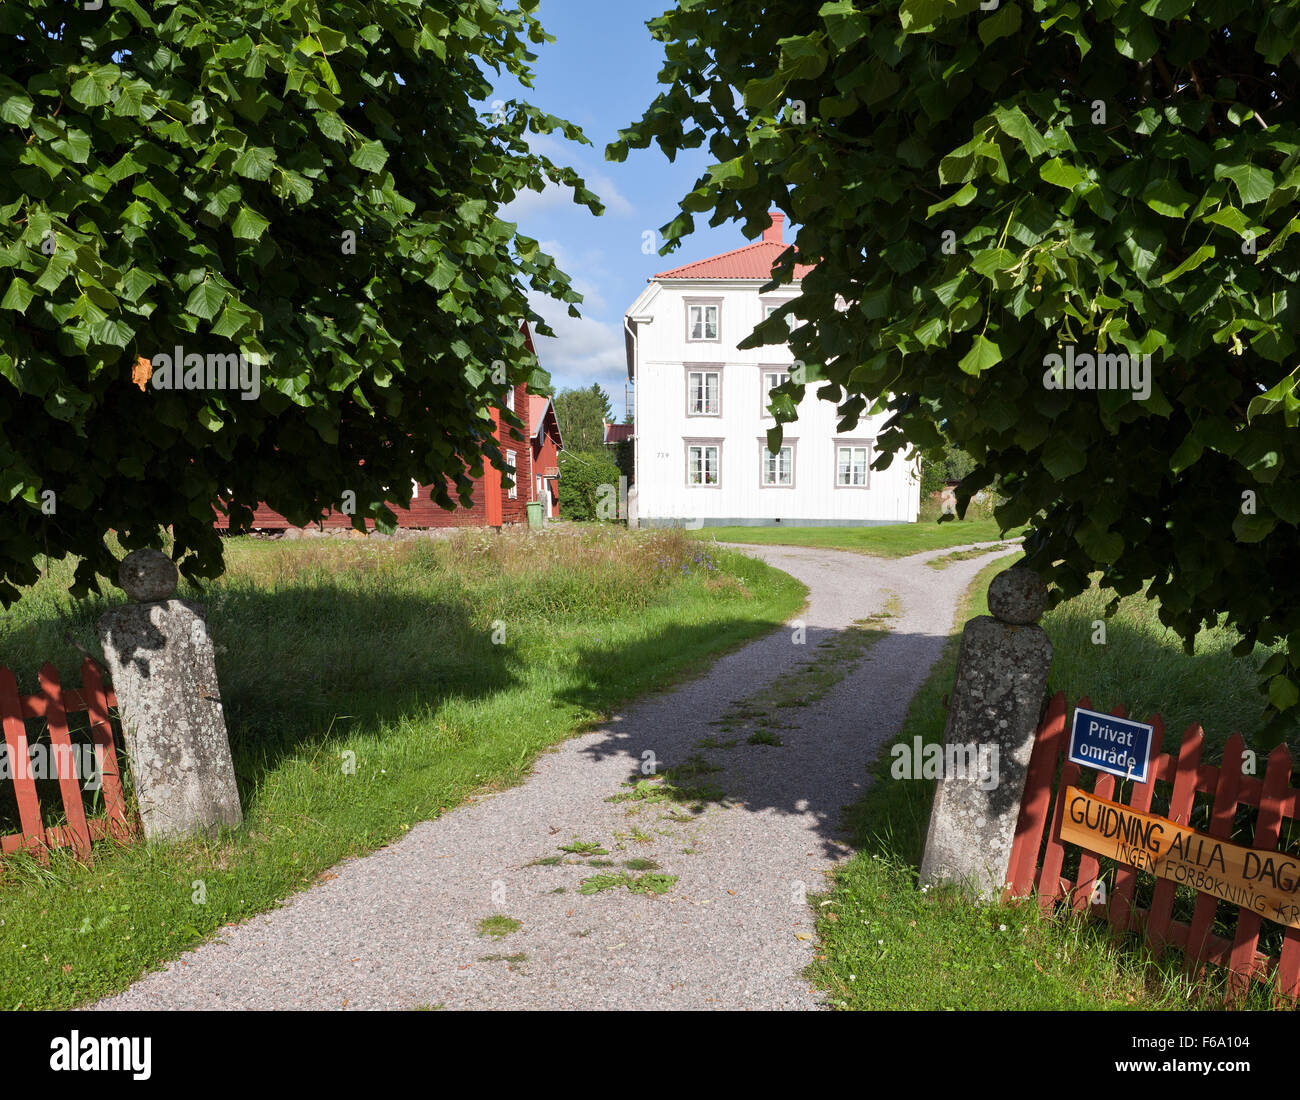 HALSINGLAND, SWEDEN ON JULY 24, 2015. View of a beautiful wooden homestead. UNESCO World Heritage Site. Entrance. Editorial use. Stock Photo